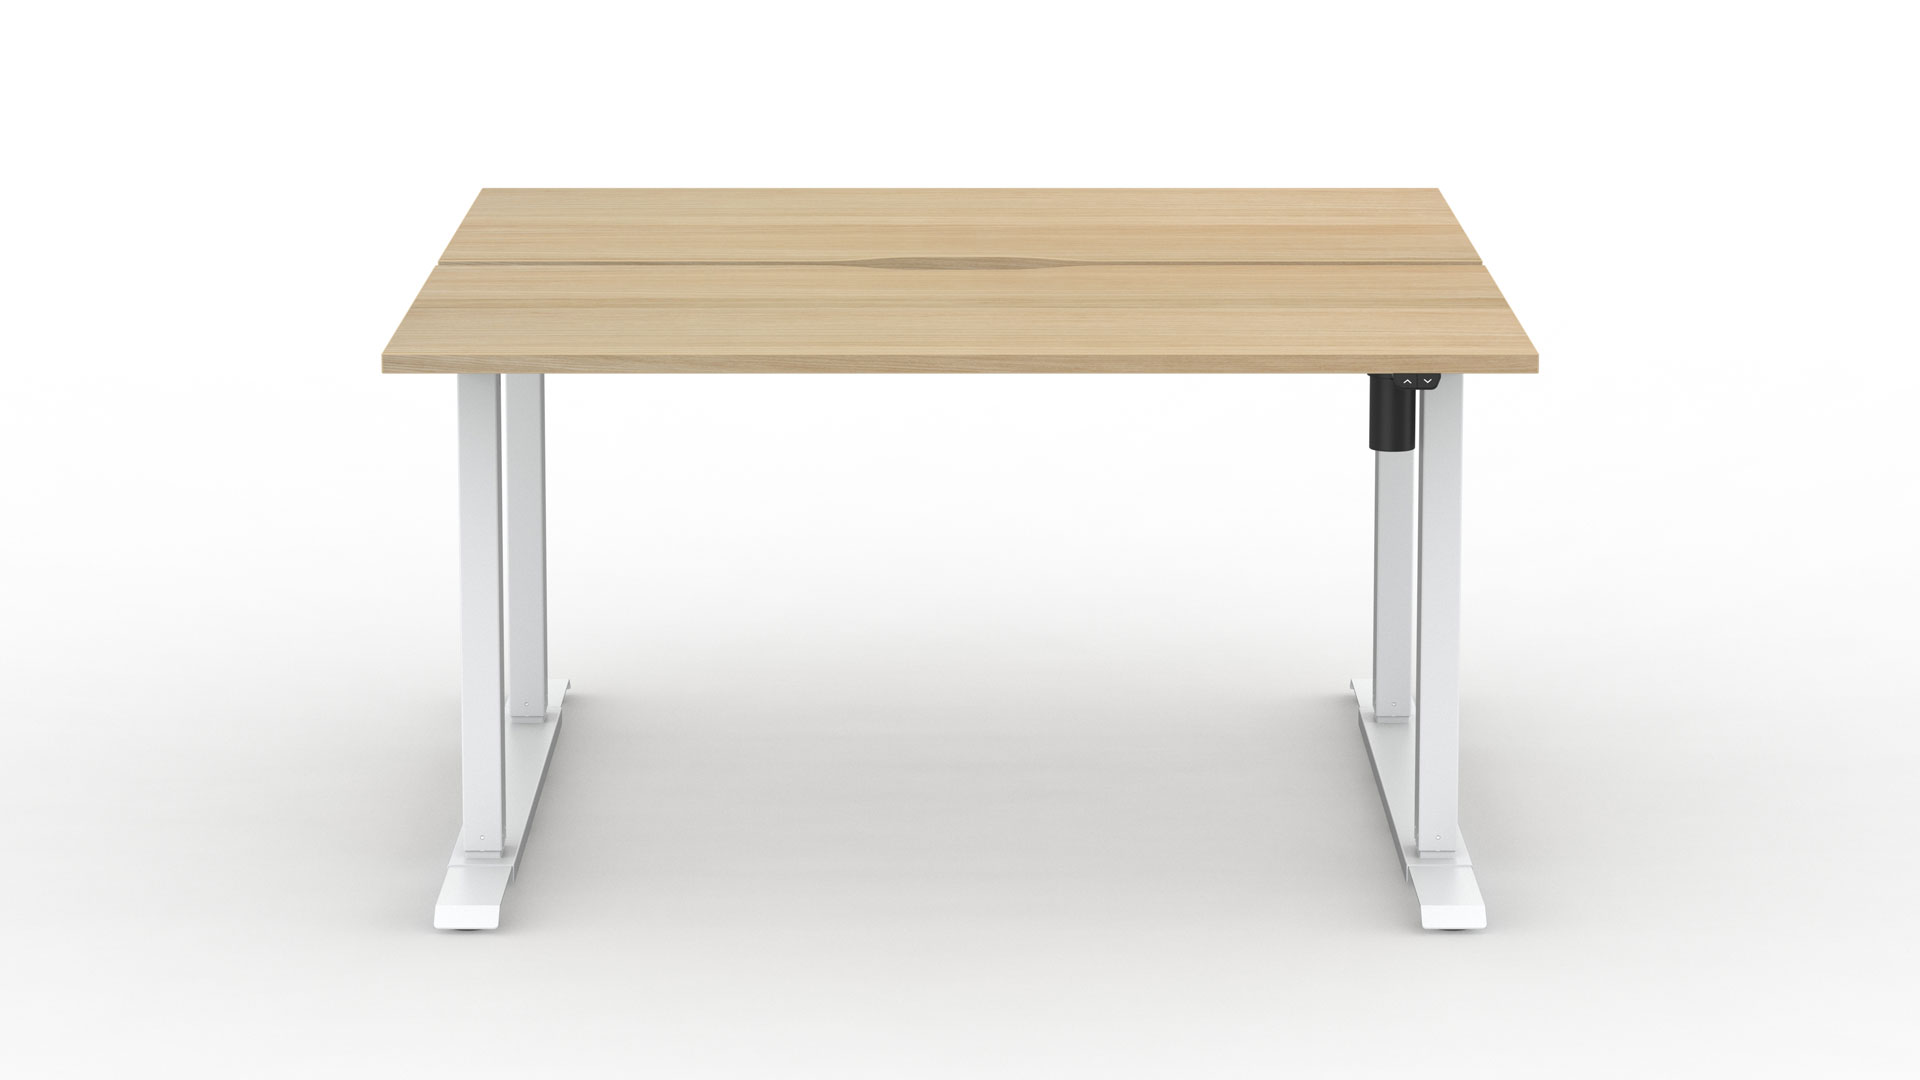 Alto 1 desk frames will accommodate a range of desktop sizes and styles.